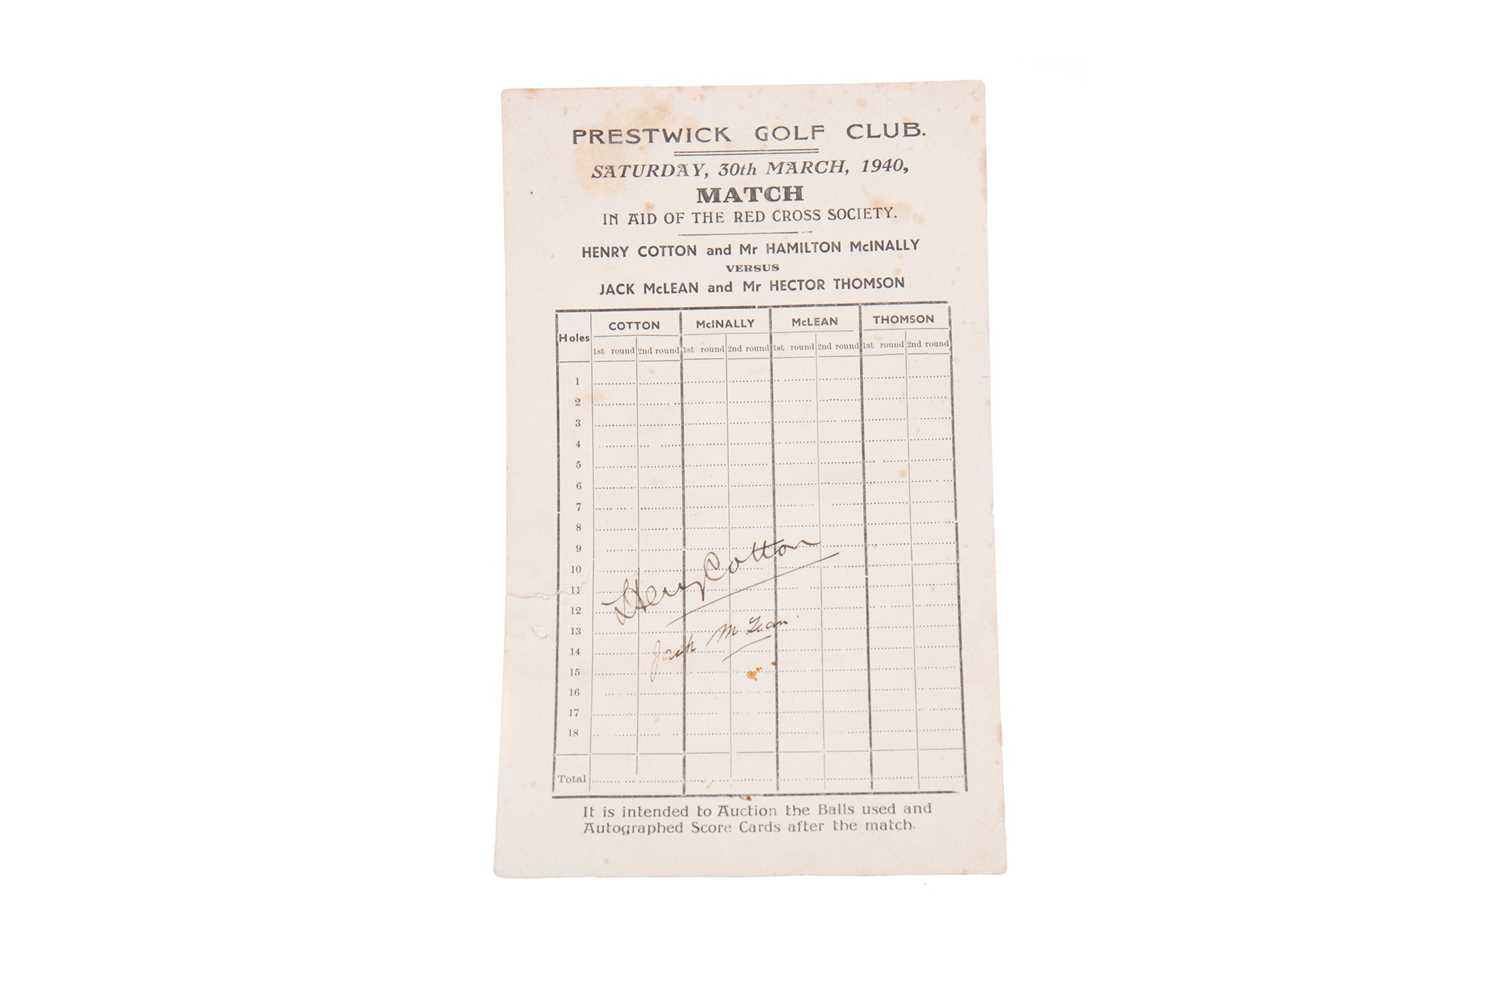 Lot 1742 - A PRESTWICK GOLF CLUB SCORE CARD SIGNED BY HENRY COTTON